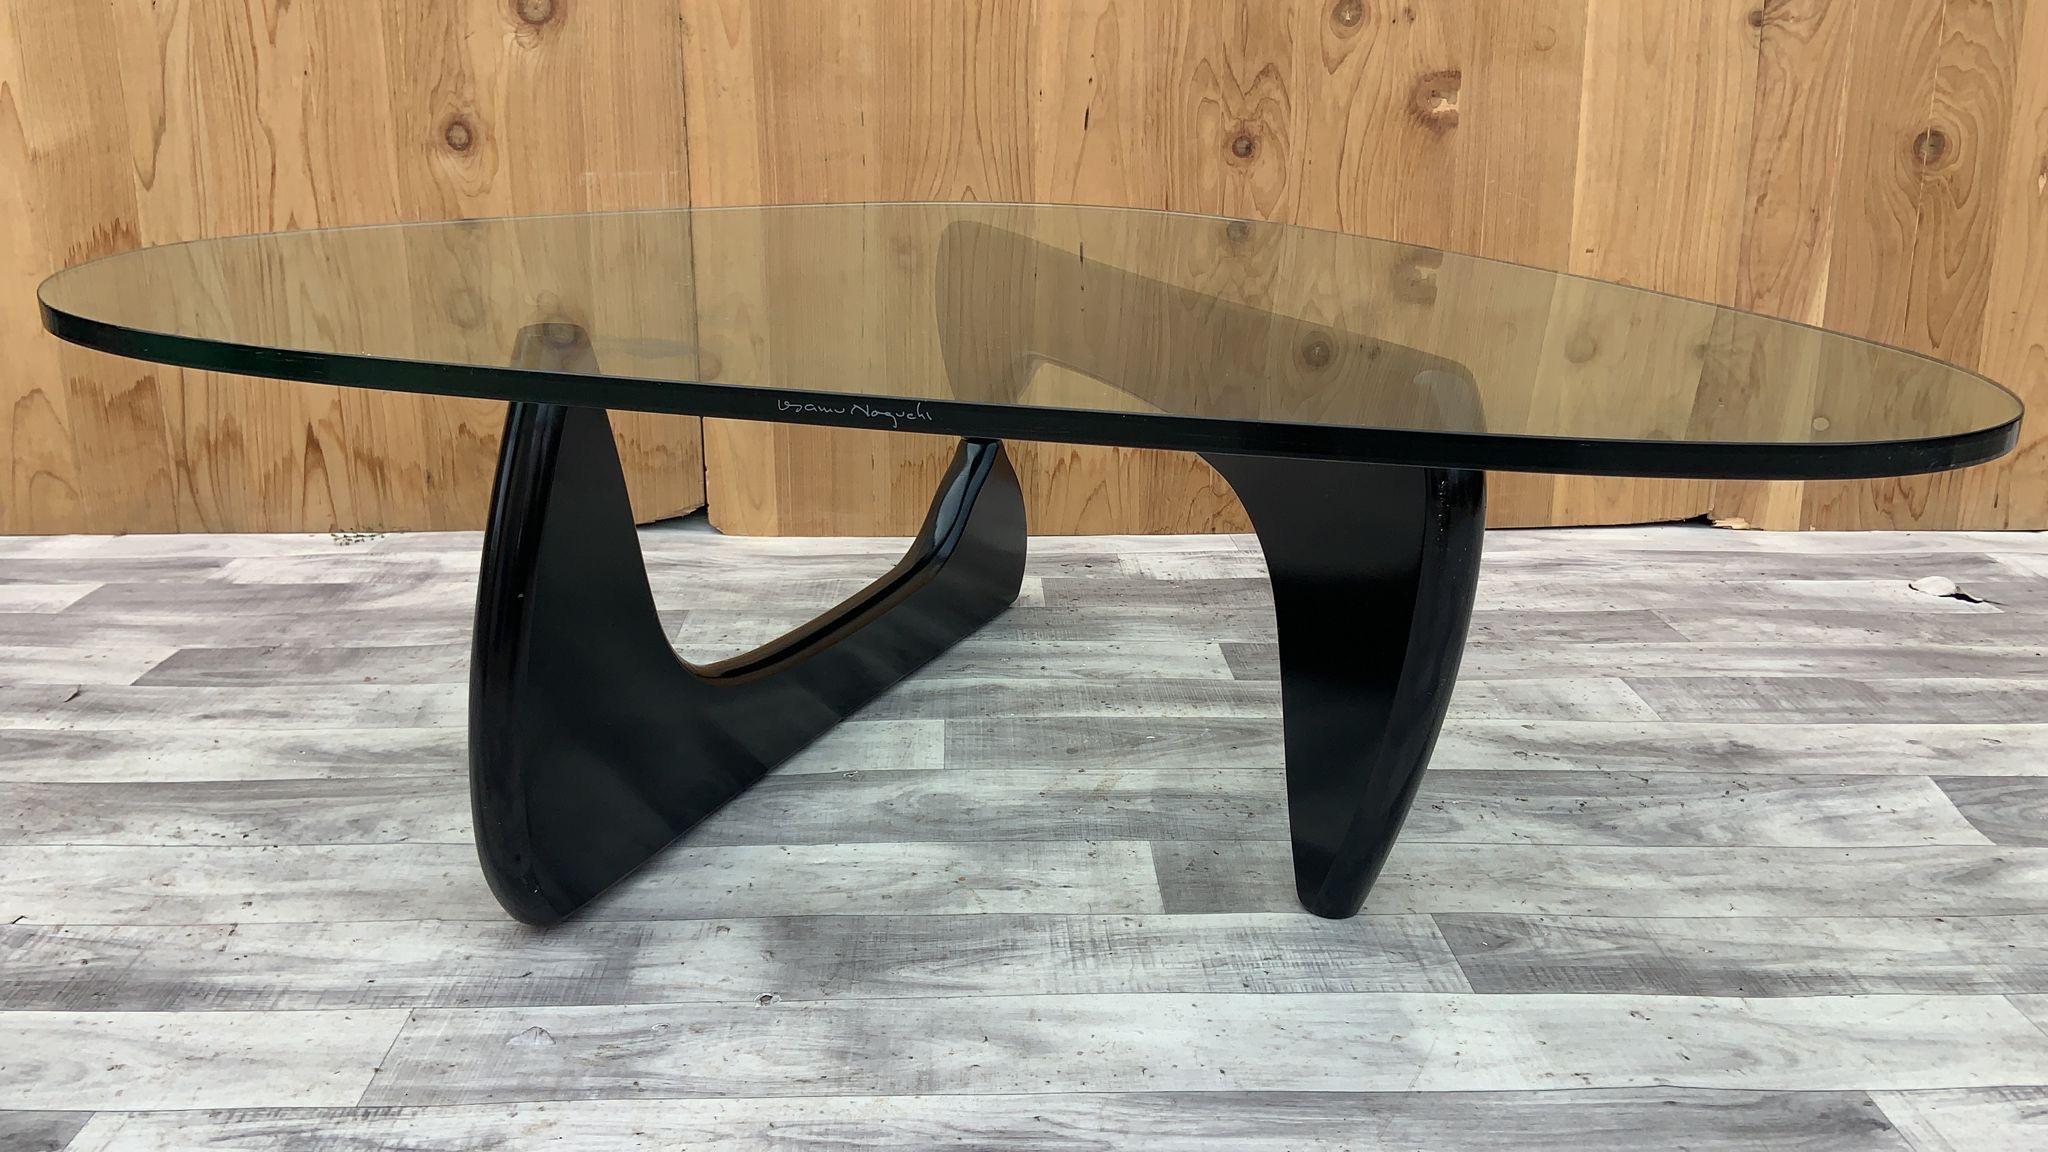 Vintage Mid Century Modern Noguchi Glass Top Coffee Table

This signed Isamu Noguchi Coffee table is a beautiful, simple design consists of only three elements, the glass top and two interlocking wood base pieces. This table was made by the